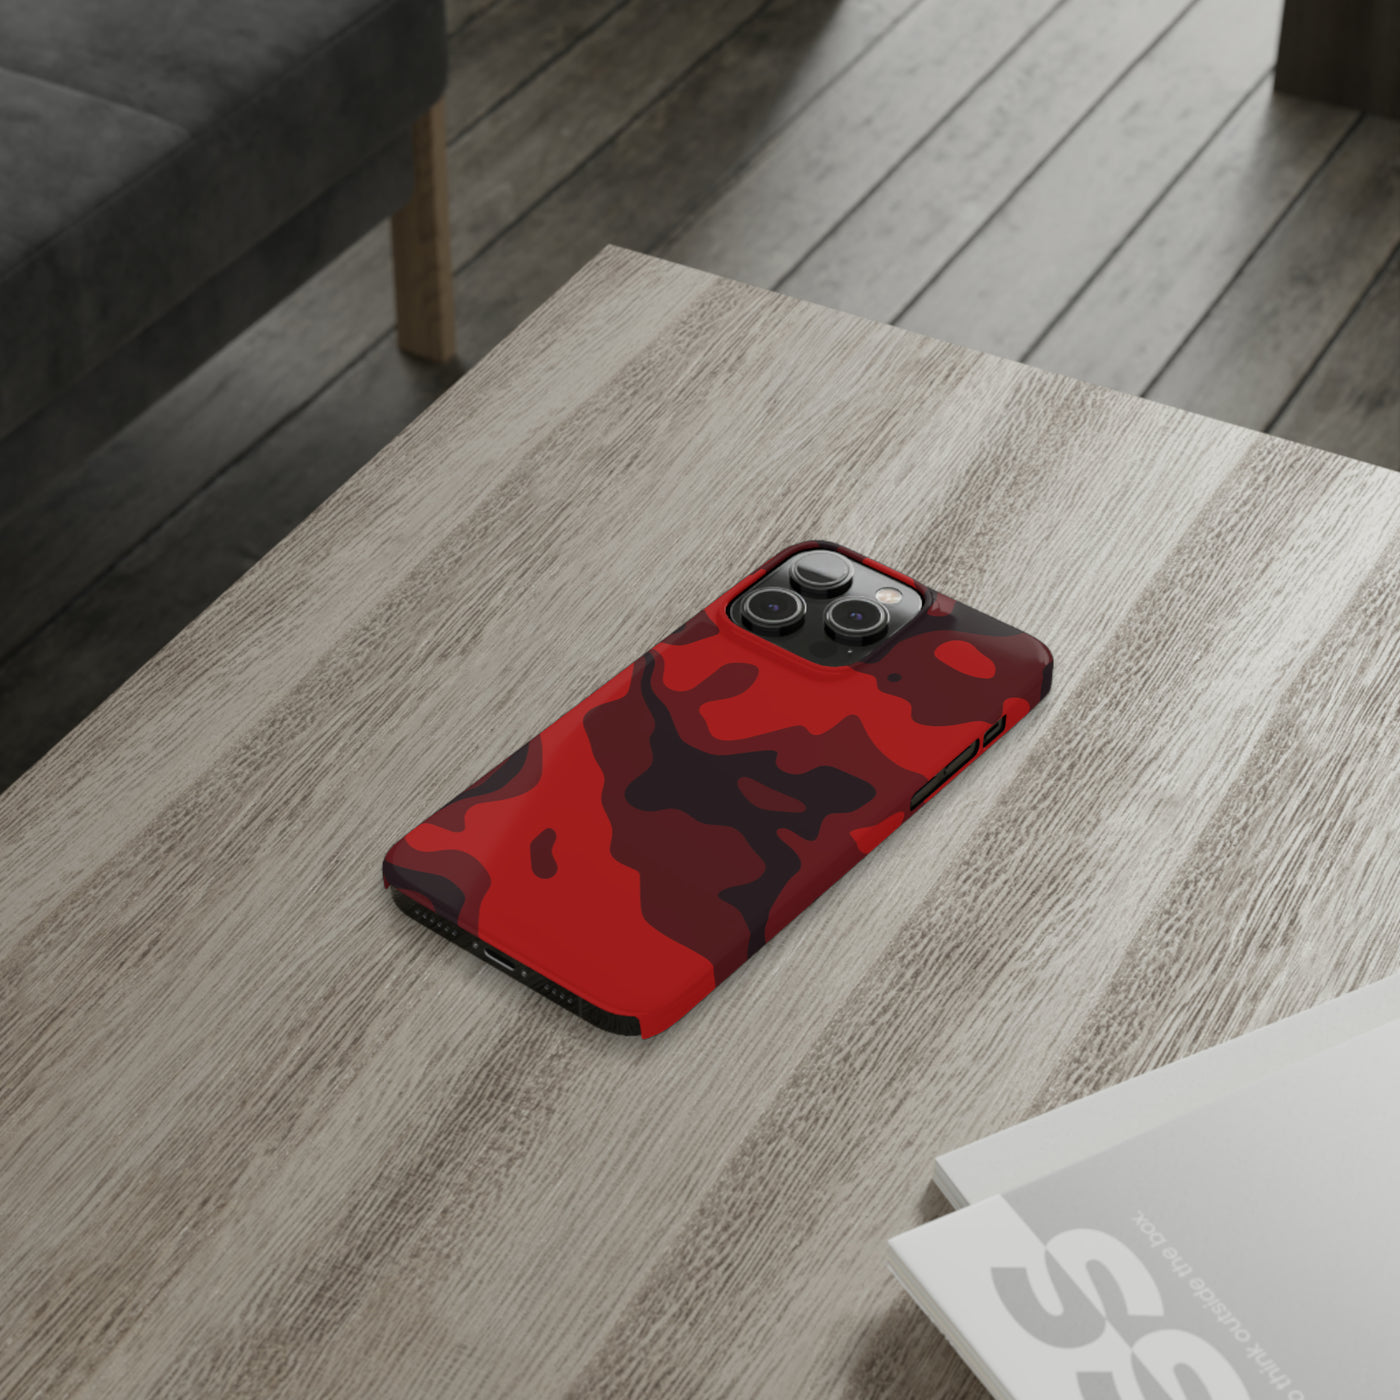 Slim Cute iPhone Cases - | iPhone 15 Case | iPhone 15 Pro Max Case, Iphone 14 Case, Iphone 14 Pro Max, Iphone 13, Red Camo Camouflage